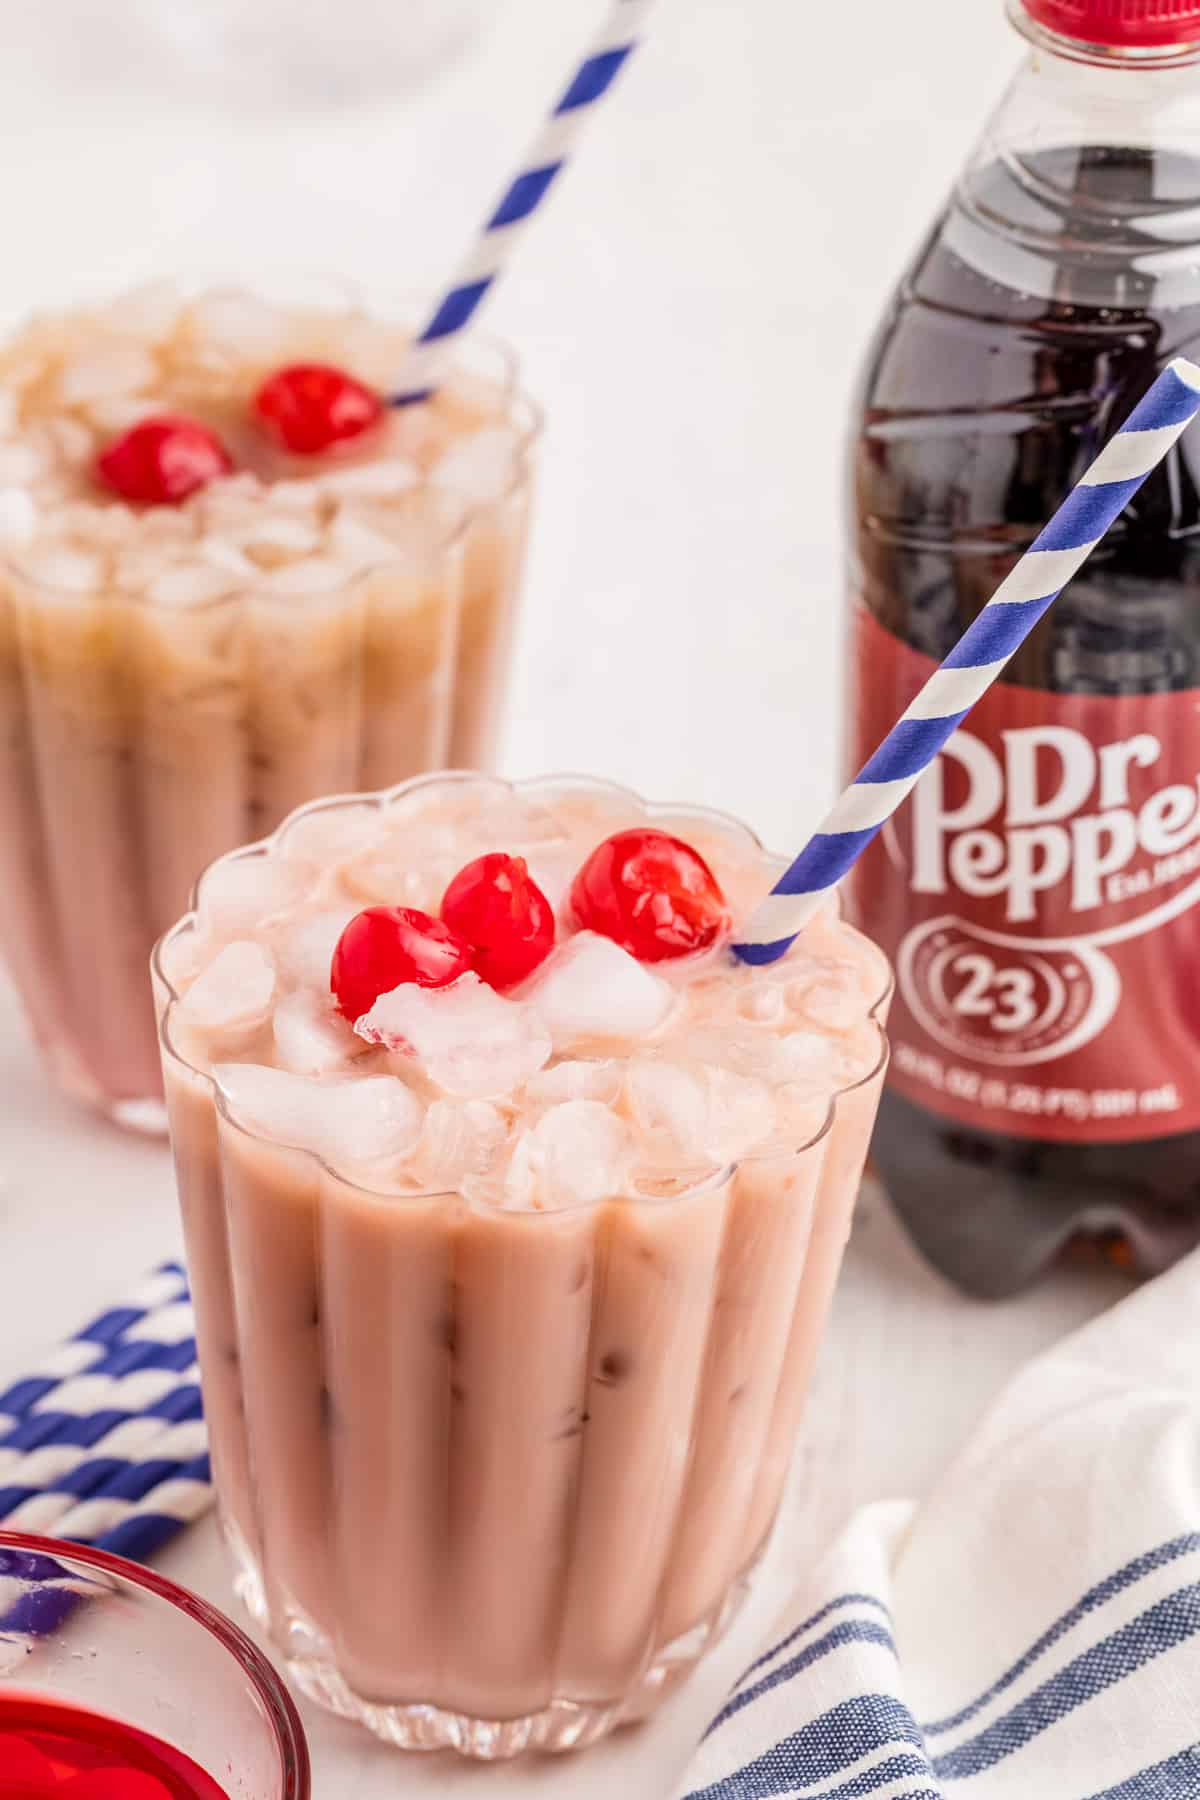 Two glasses of soda garnished with cherries and straws with a bottle of Dr. Pepper in background.